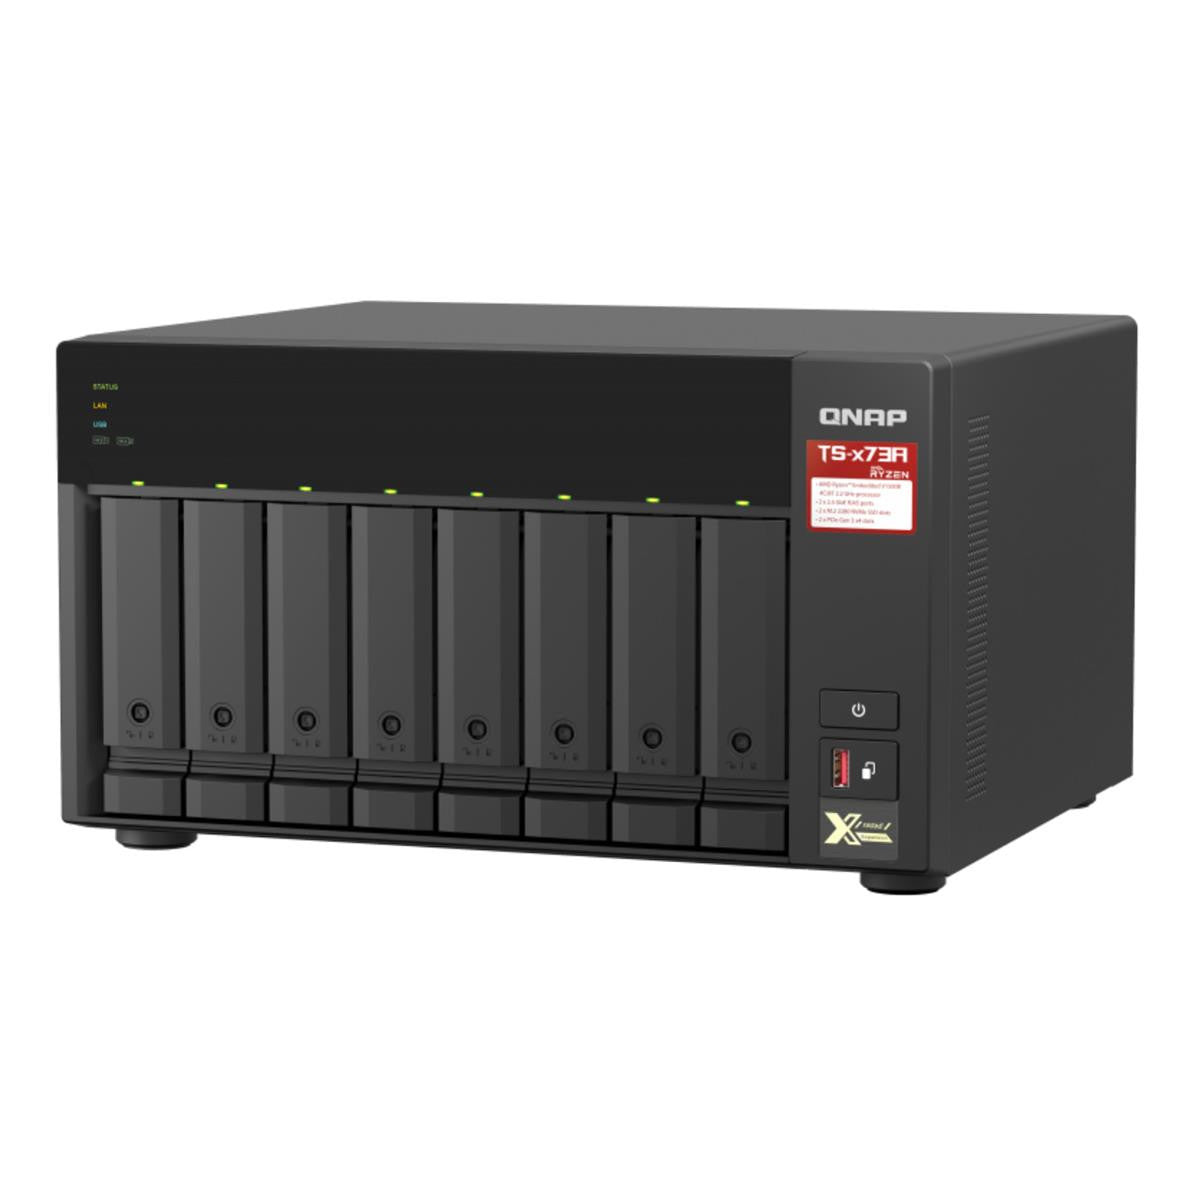 QNAP TS-873A 8-BAY NAS with 16GB DDR4 RAM and 32TB (8x4TB) Seagate Ironwolf NAS Drives Fully Assembled and Tested